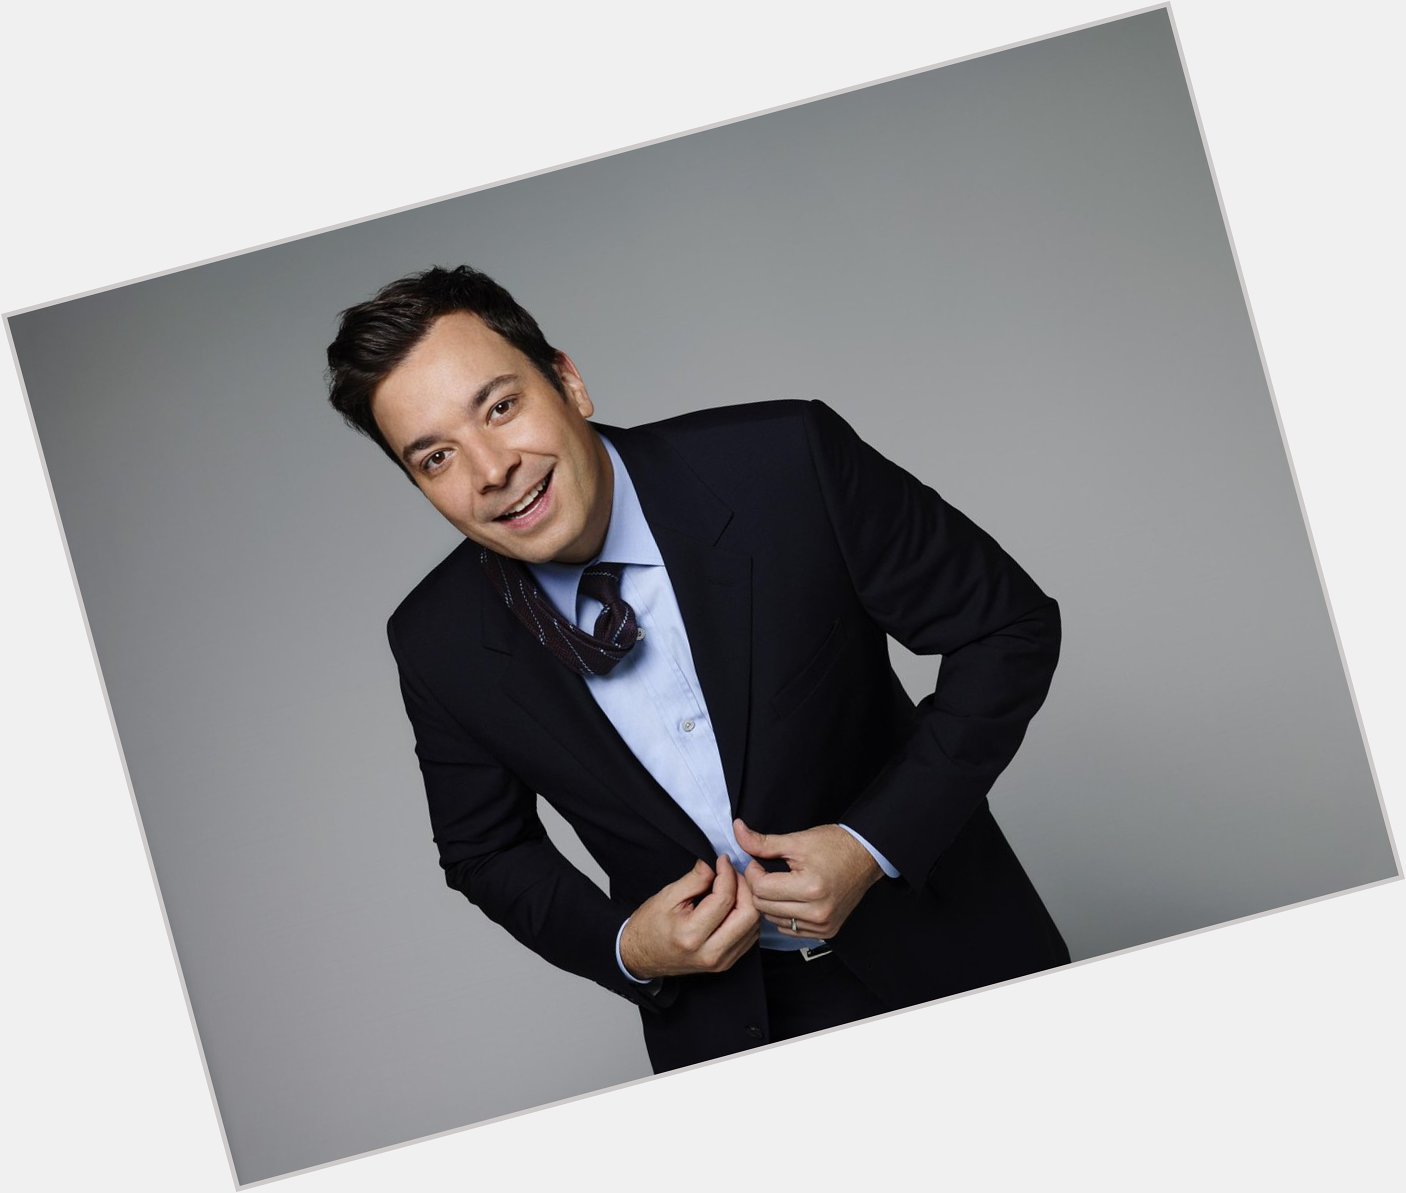 Happy birthday Jimmy Fallon! The comedian and Tonight Show host turns 41 today! 